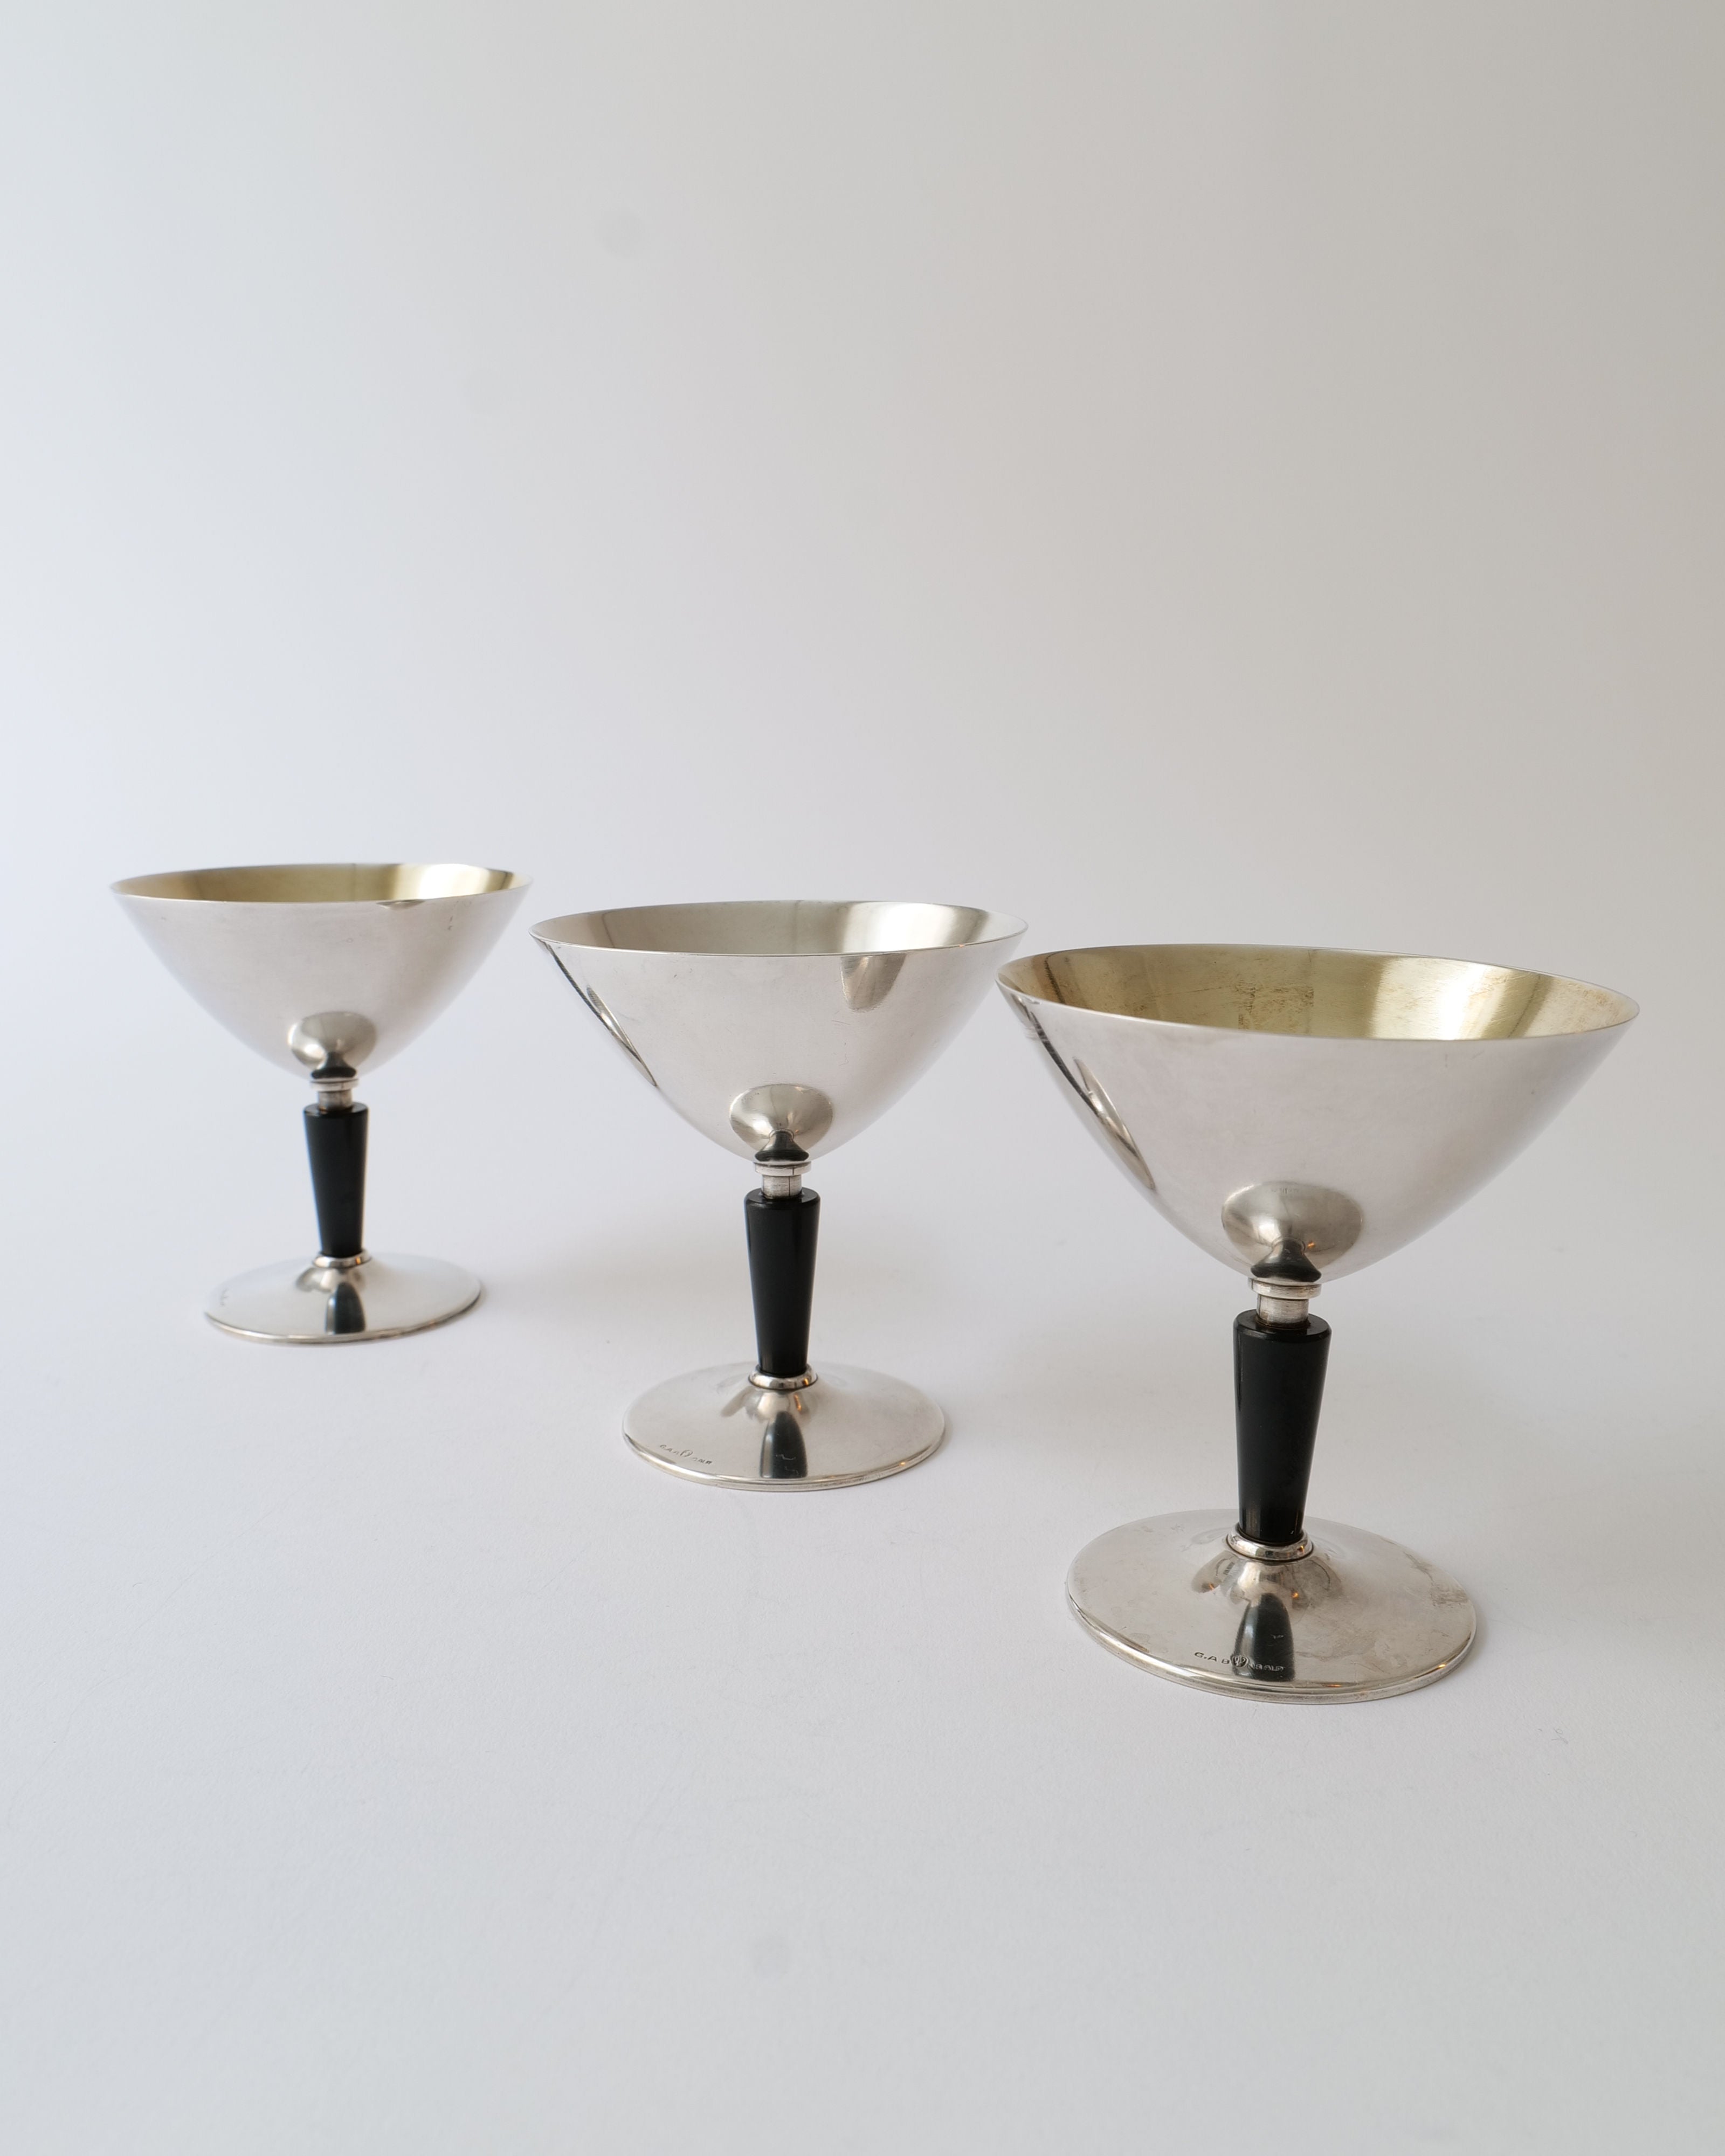 Folke Ahrström Cocktail Set 1930: Vintage-inspired, stainless steel 5-piece set with shaker, strainer, jigger, spoon, and tongs